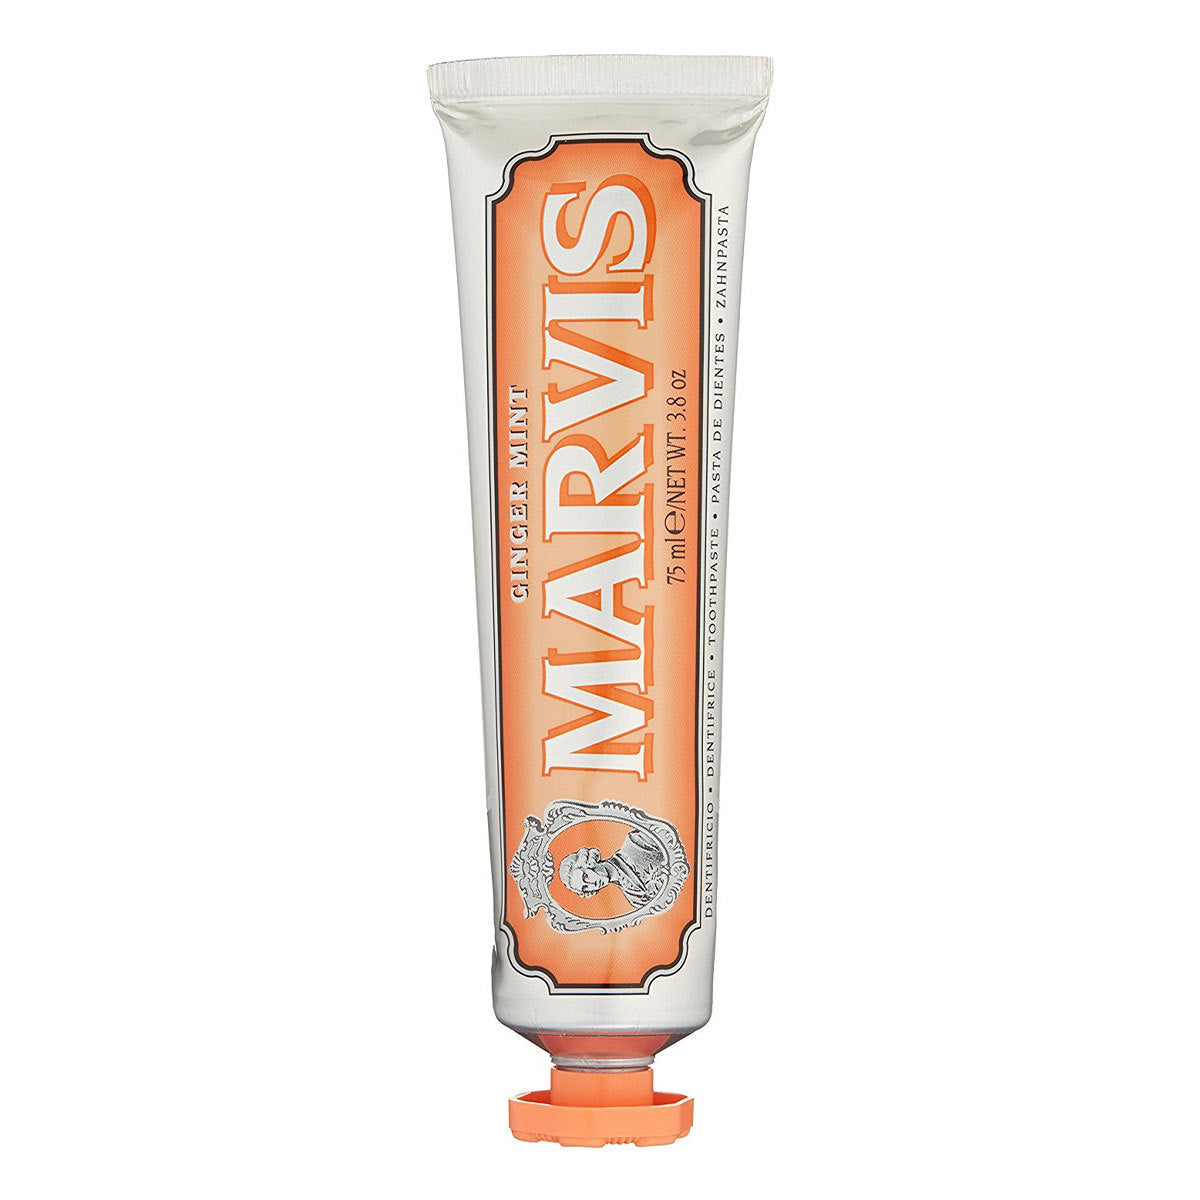 Primary image of Marvis Ginger Mint Toothpaste